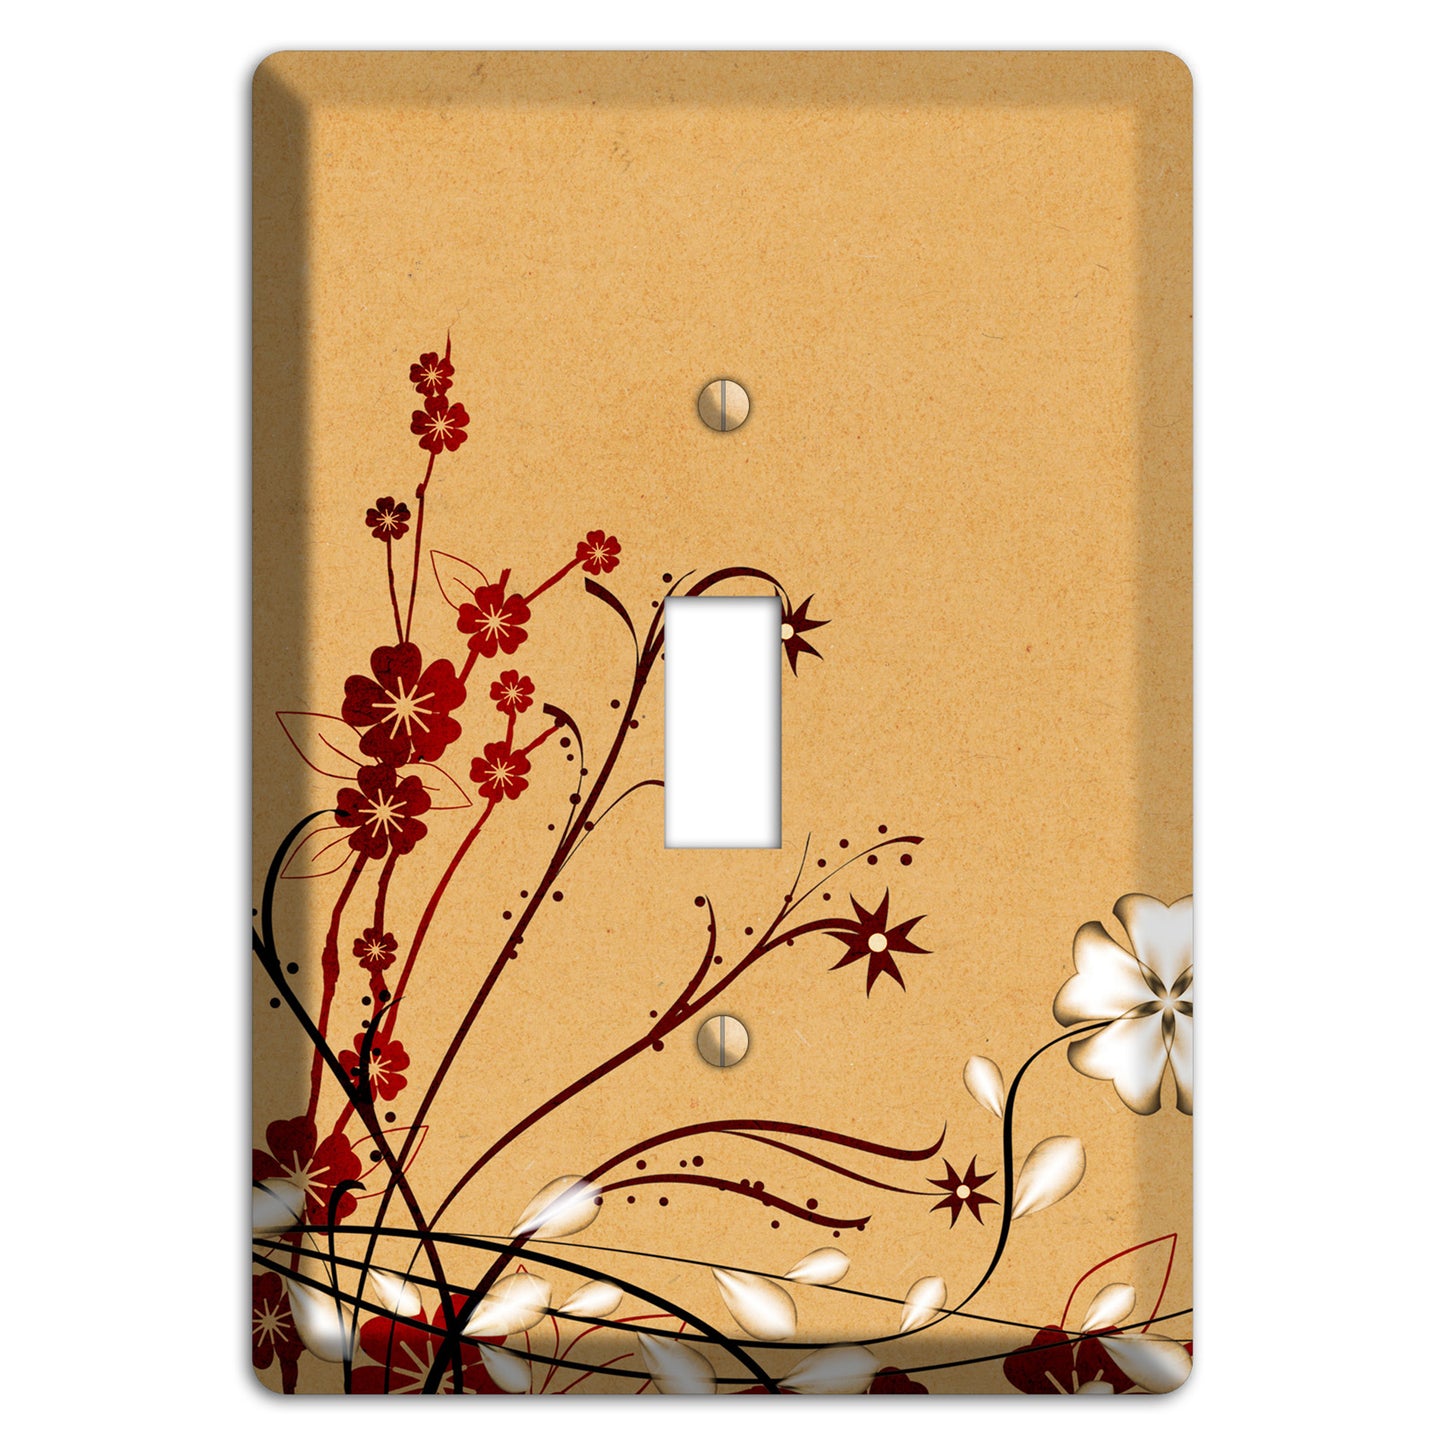 Delicate Red Flowers Cover Plates